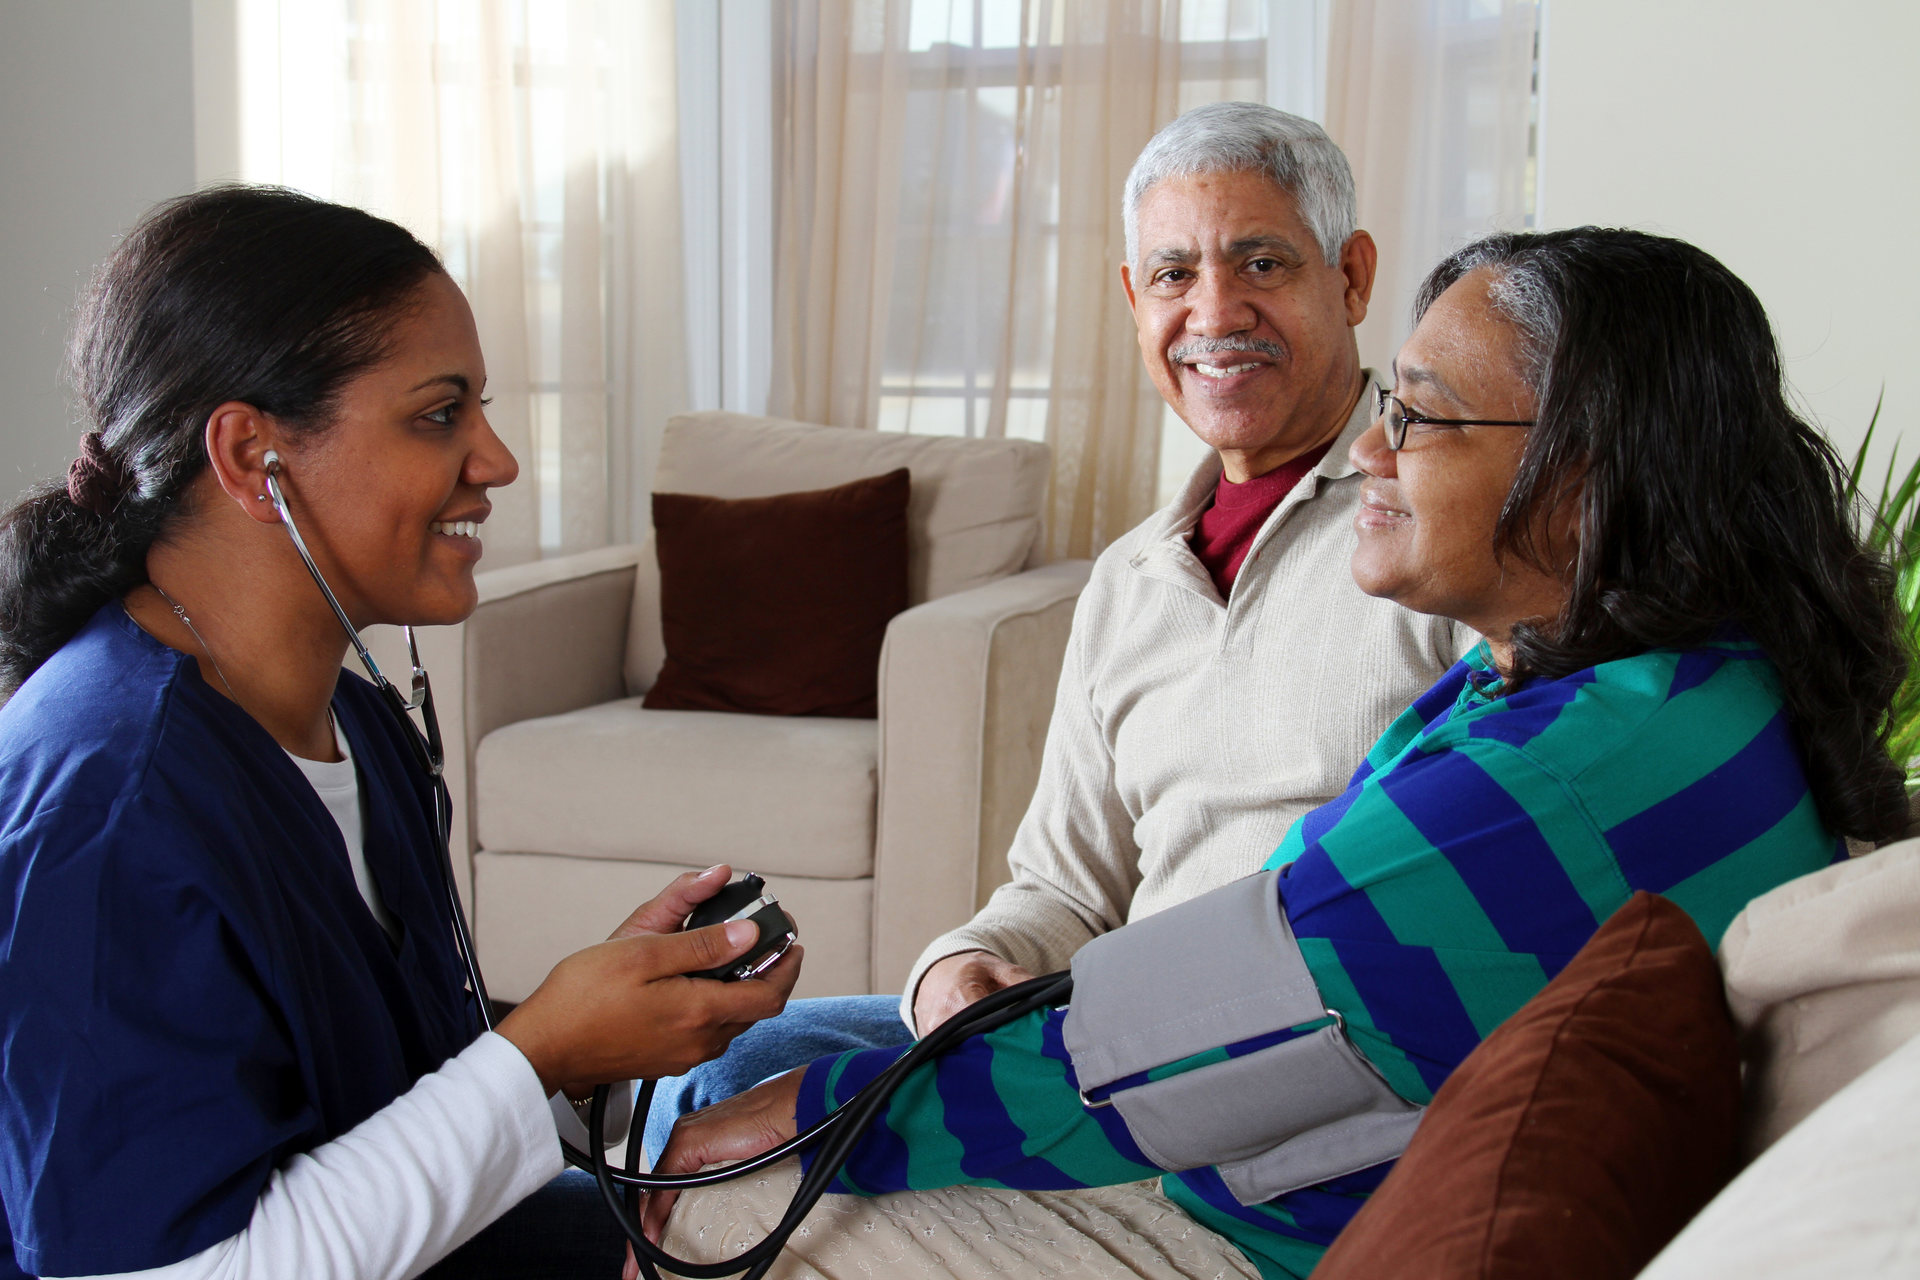 Providing excellent and affordable home health care and community-based social services